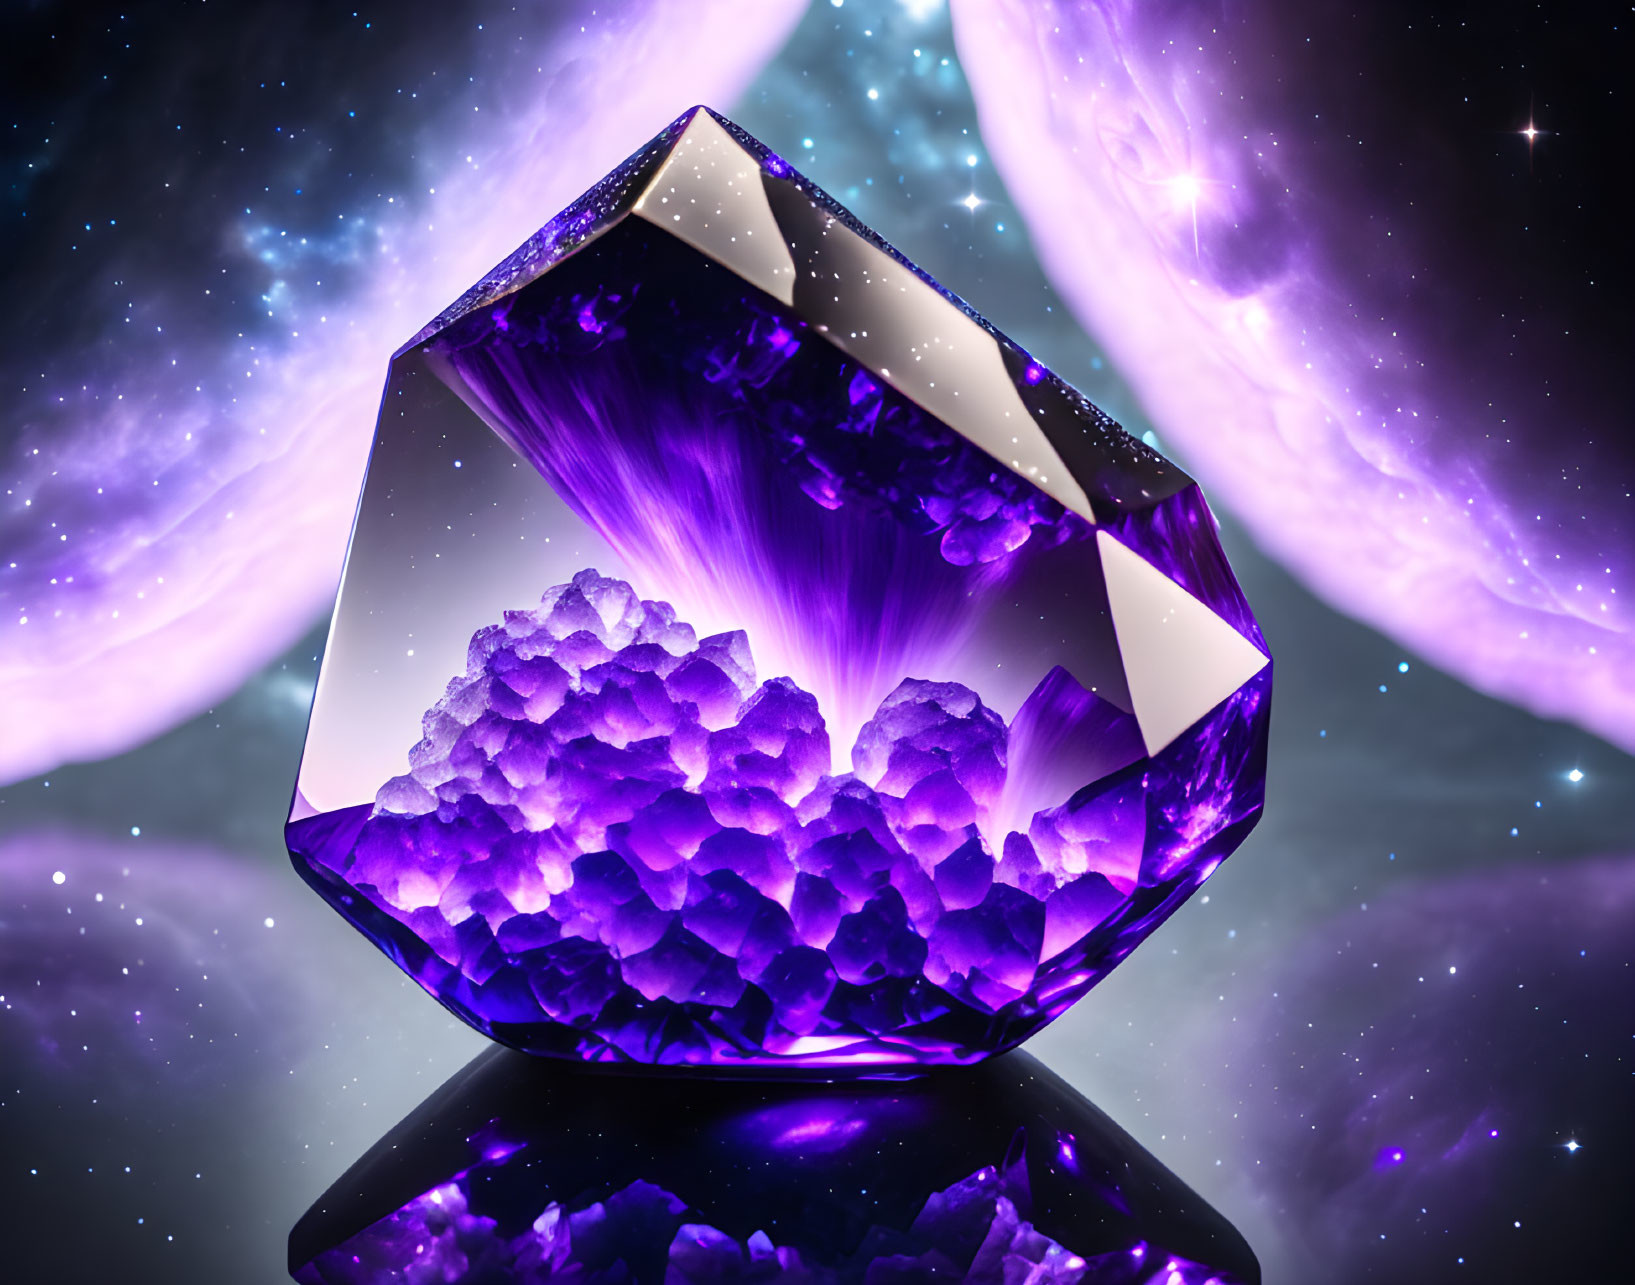 Colorful 3D Crystal Illustration with Purple Geode Formations and Cosmic Background